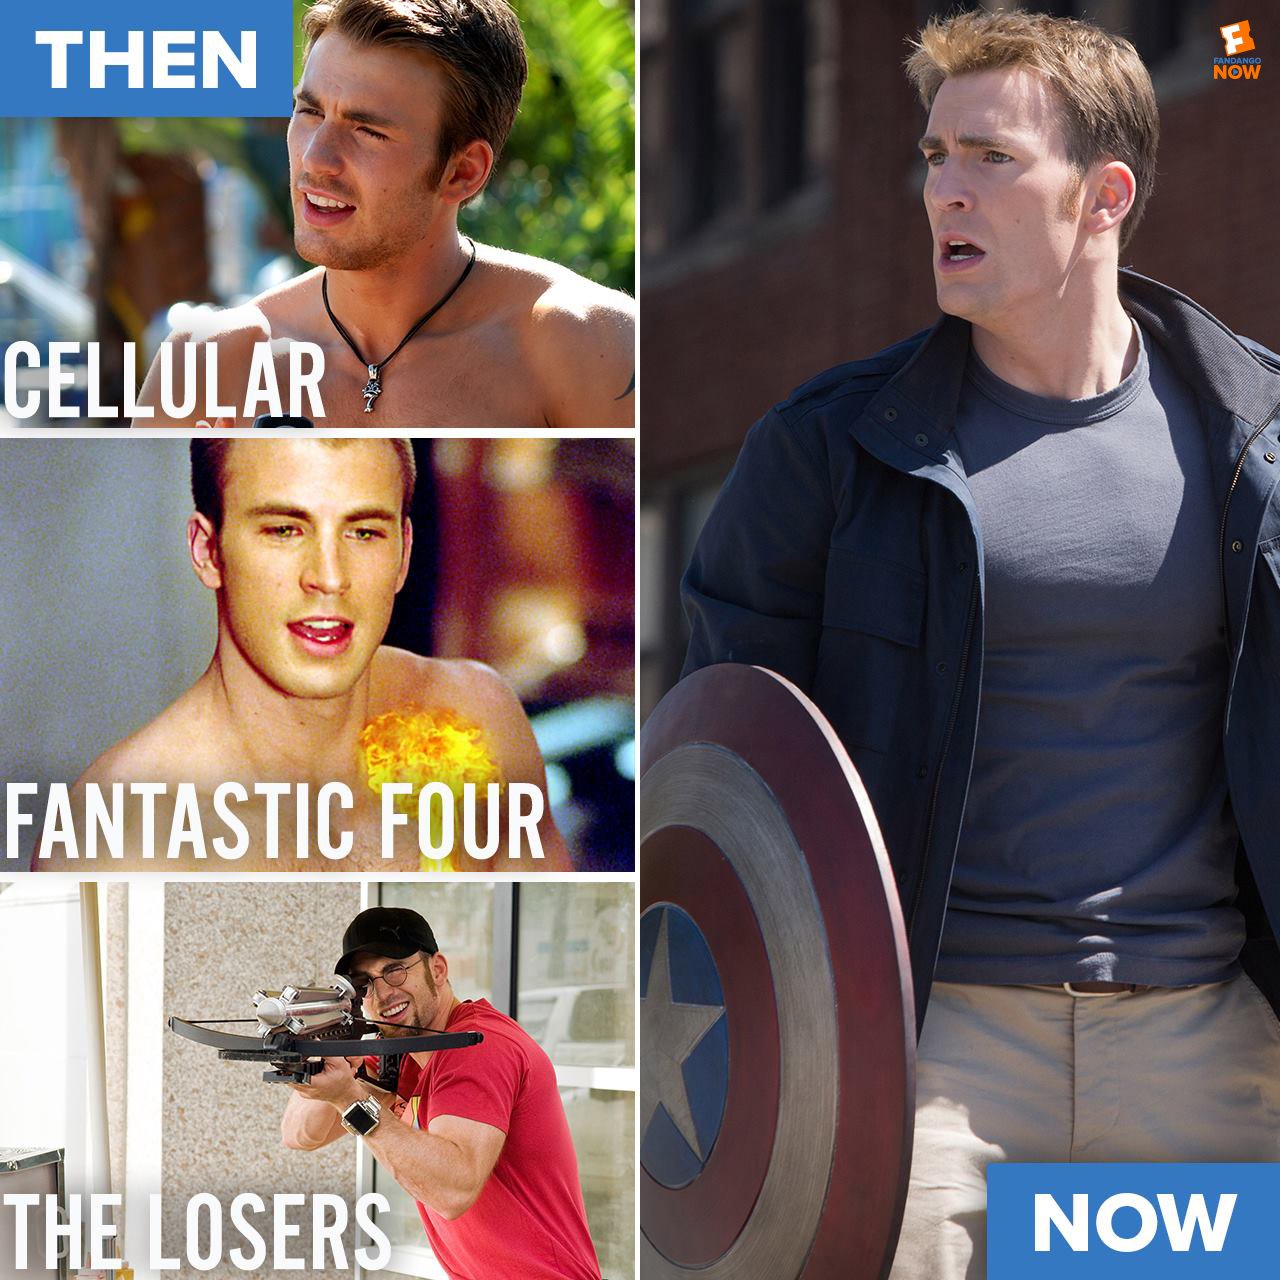 Happy birthday salute to Stay home with Mr. Captain America w/ FandangoNOW:  